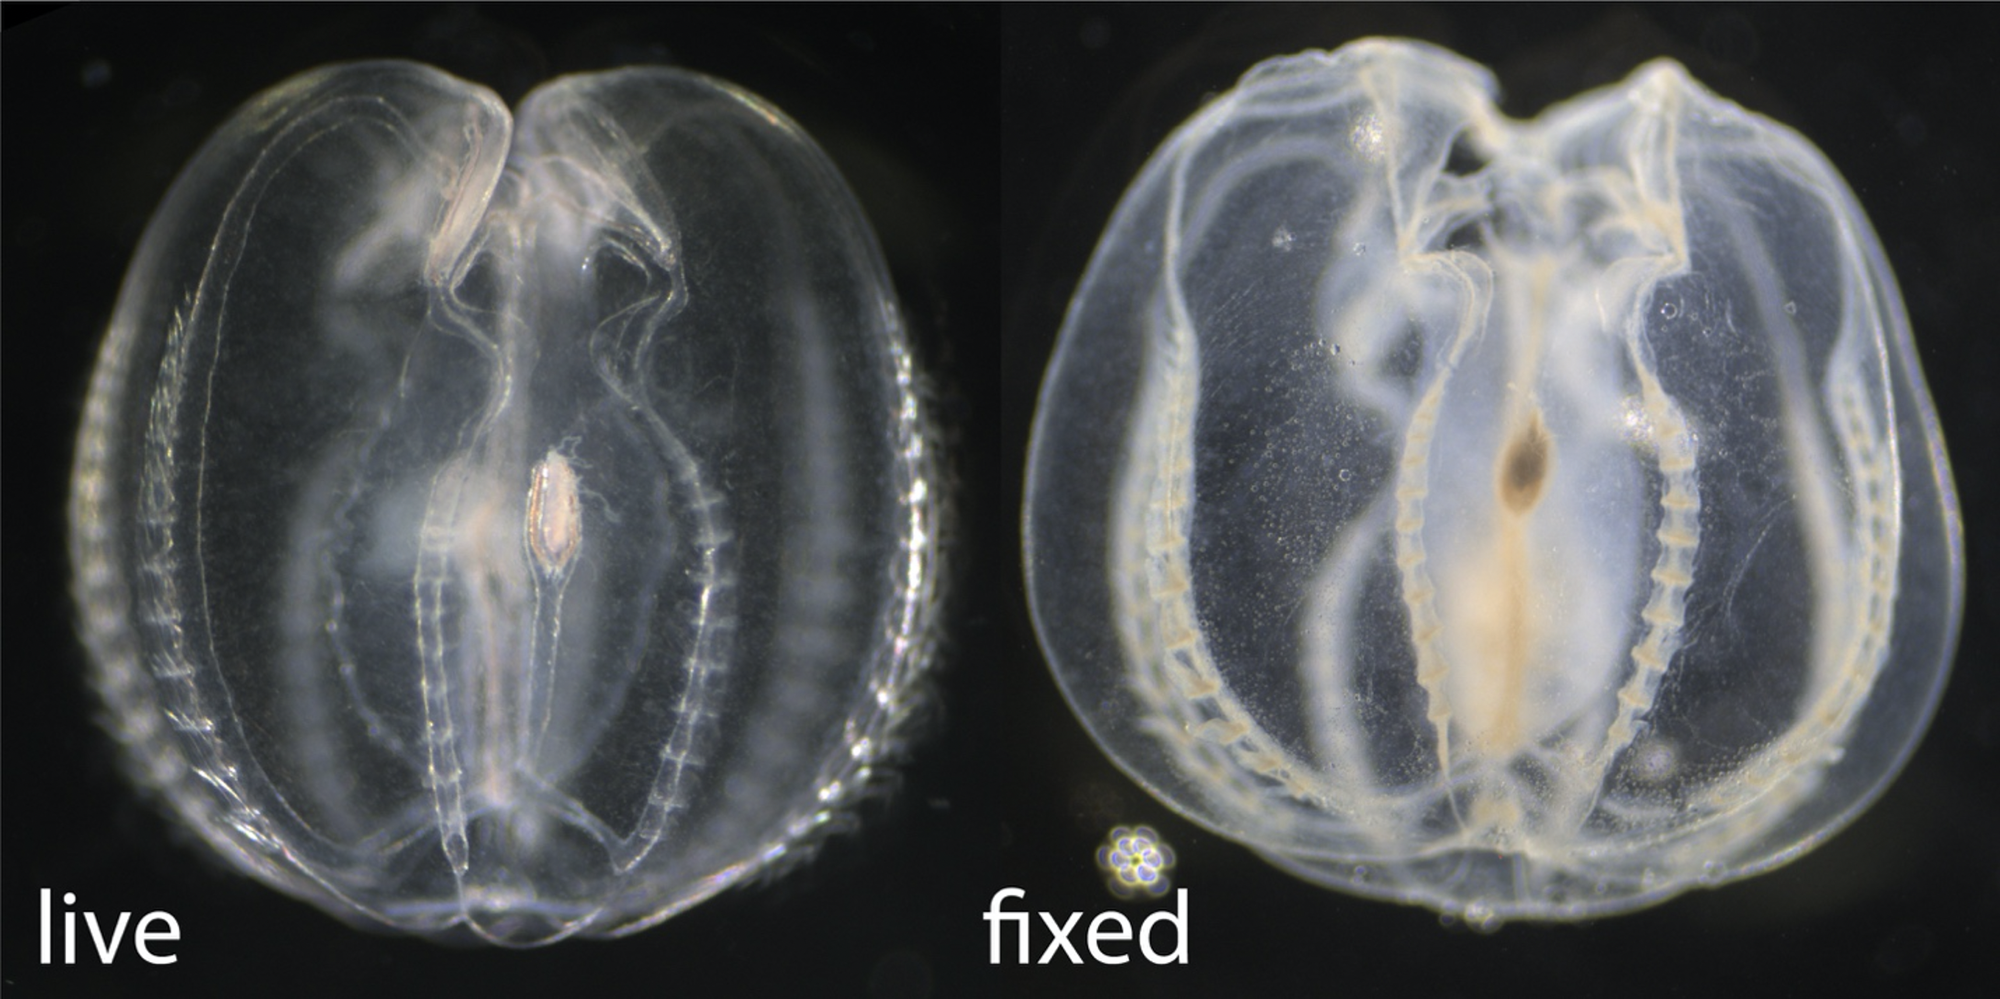 Microscope pictures of a live comb jelly (left) compared to a comb jelly preserved with Rain-X (right). Scientists preserve animal tissues to learn more about the molecular and cellular details of biological processes.